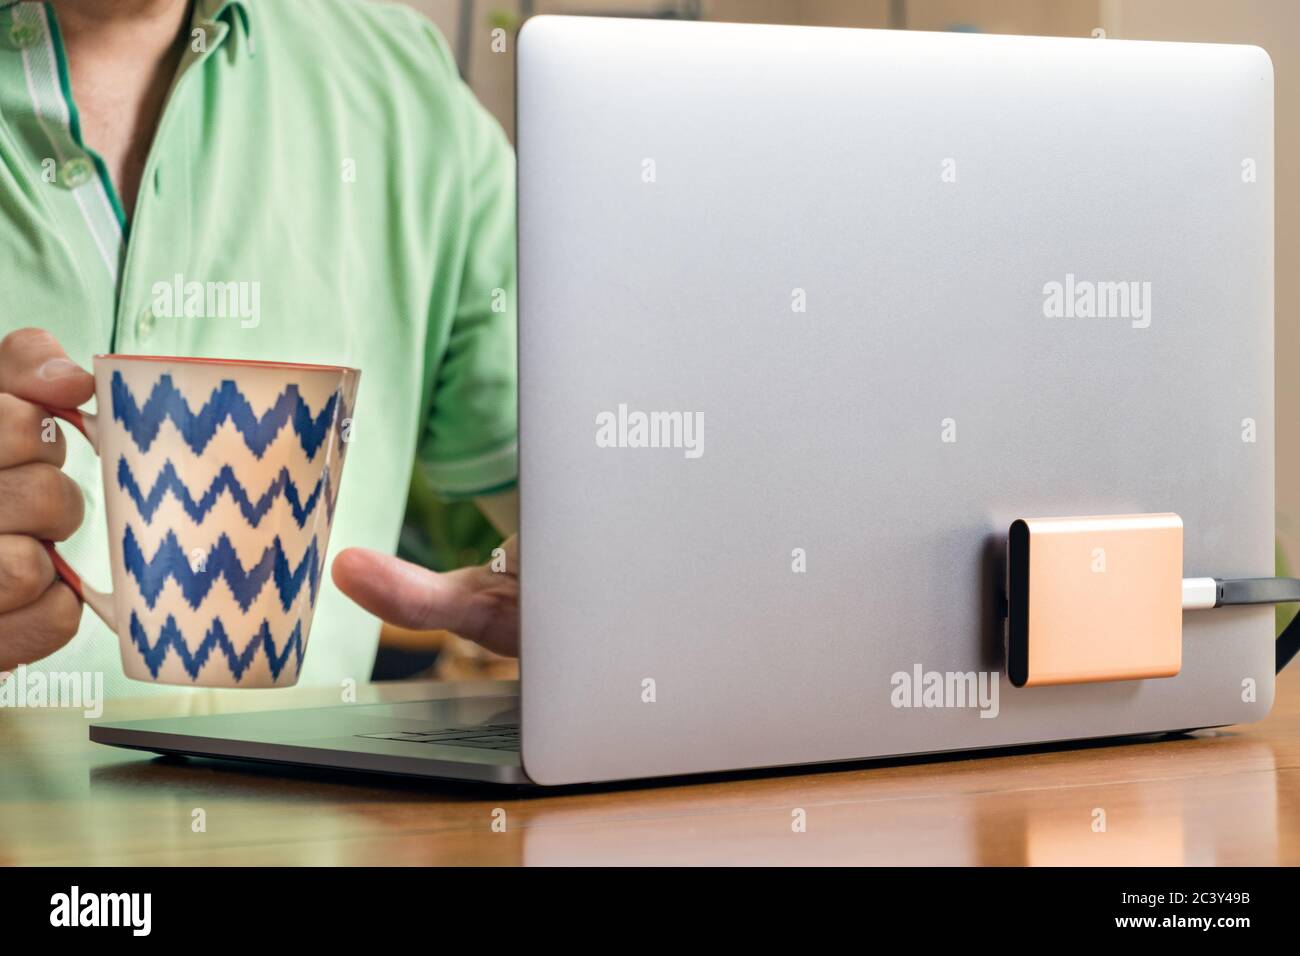 A portable SSD hard drive connected to a laptop using an usb type c port. Stock Photo